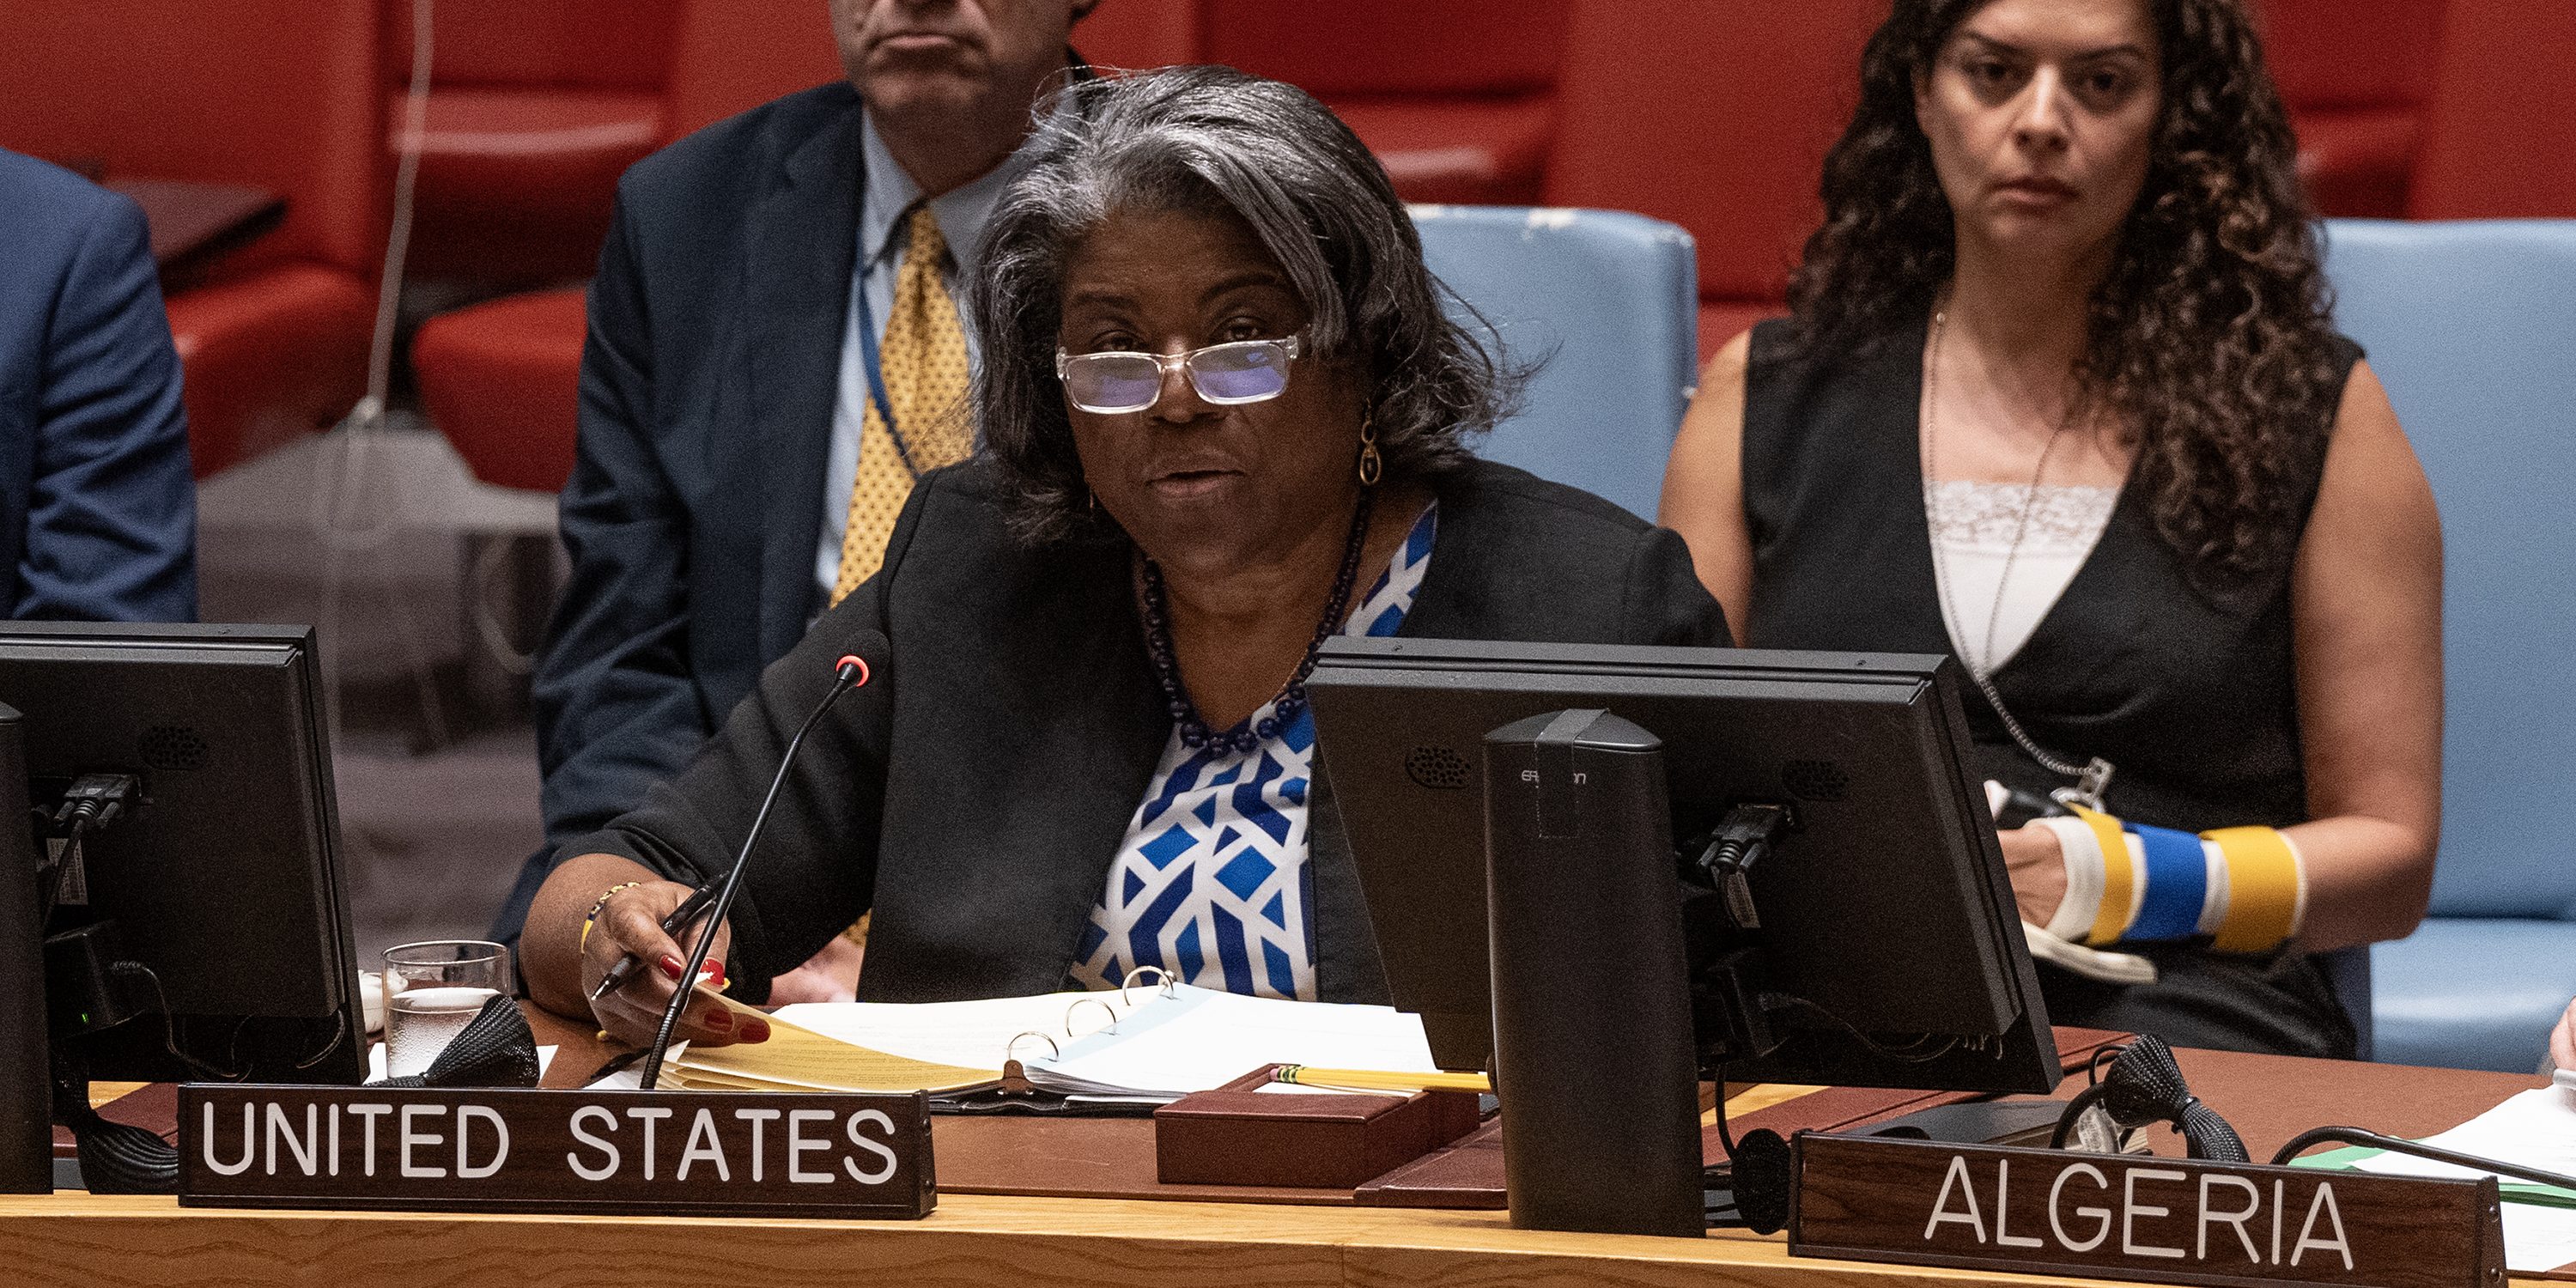 NEW YORK, UNITED STATES - 2024/07/09: Ambassador Linda Thomas-Greenfield of The United States speaks during emergency Security Council meeting at UN Headquarters. Meeting was called after Russia bombed many civilian places in Ukraine on July 8, 2024 including children's hospital in Kyiv. Russia claimed the blast was caused by a misfiring Ukrainian air defense missile, but the UN said it was highly likely Moscow was behind the attack. Video footage and a site assessment indicated the building was directly hit by a Russian missile. (Photo by Lev Radin/Pacific Press/LightRocket via Getty Images)